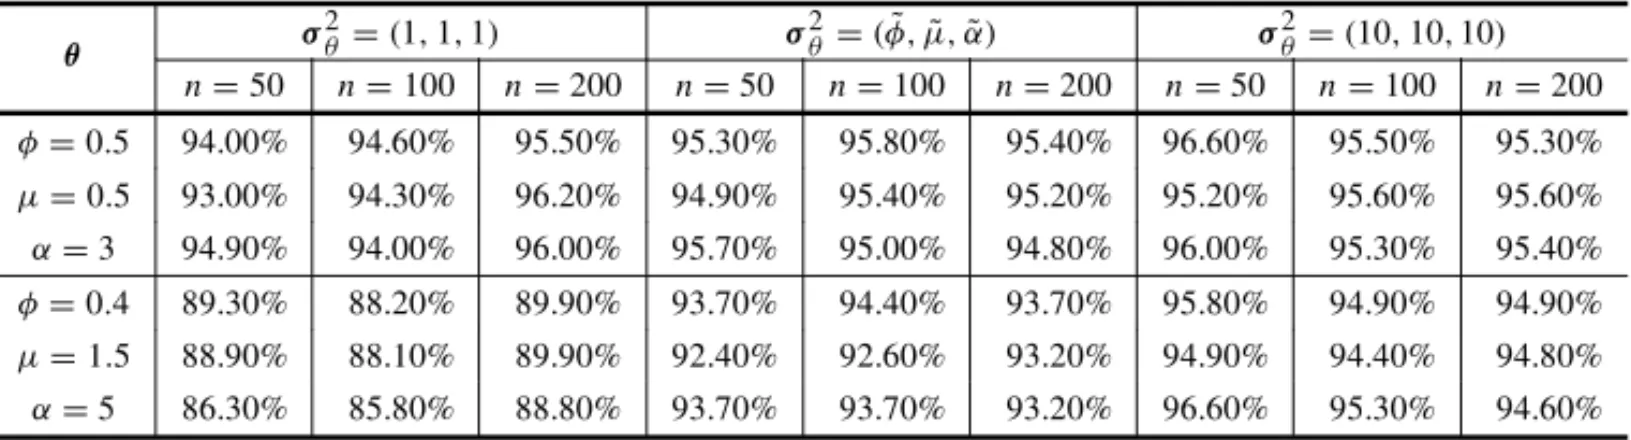 Table 5 – Coverage probabilities with a confidence level of 95% of the estimates of posterior means obtained from 1000 simulated samples of size n = (50, 100, 200), with different values of θ , using the gamma prior distribution with λ = ( φ,˜ µ,˜ α),˜ σ 2